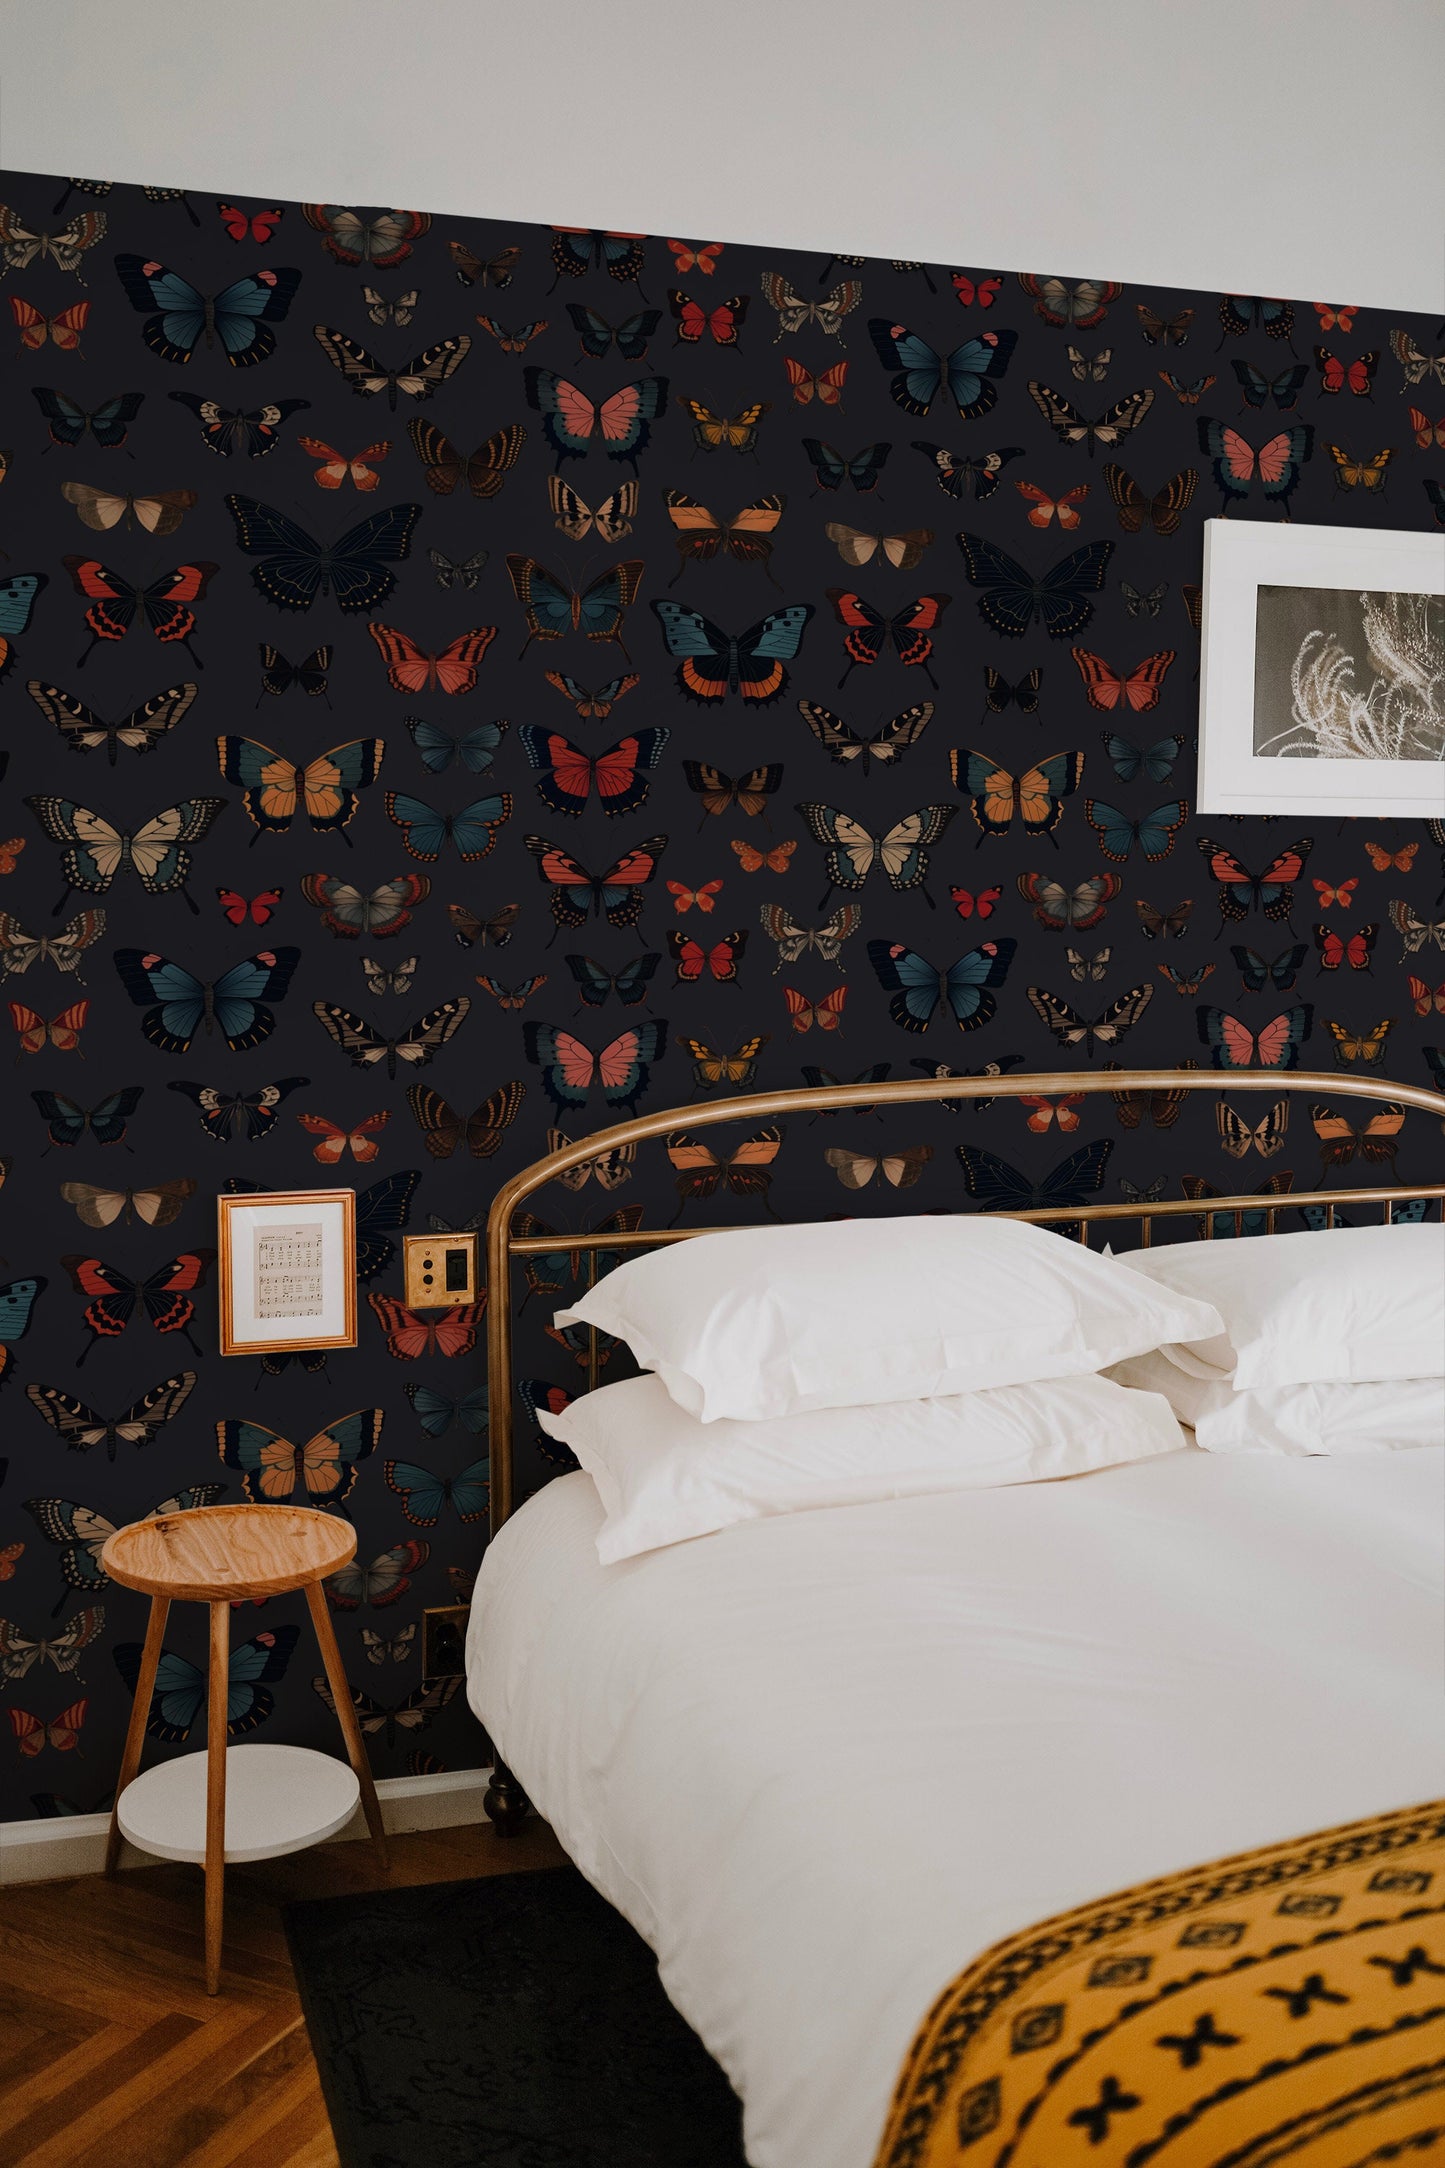 a bed in a bedroom with a black wallpaper